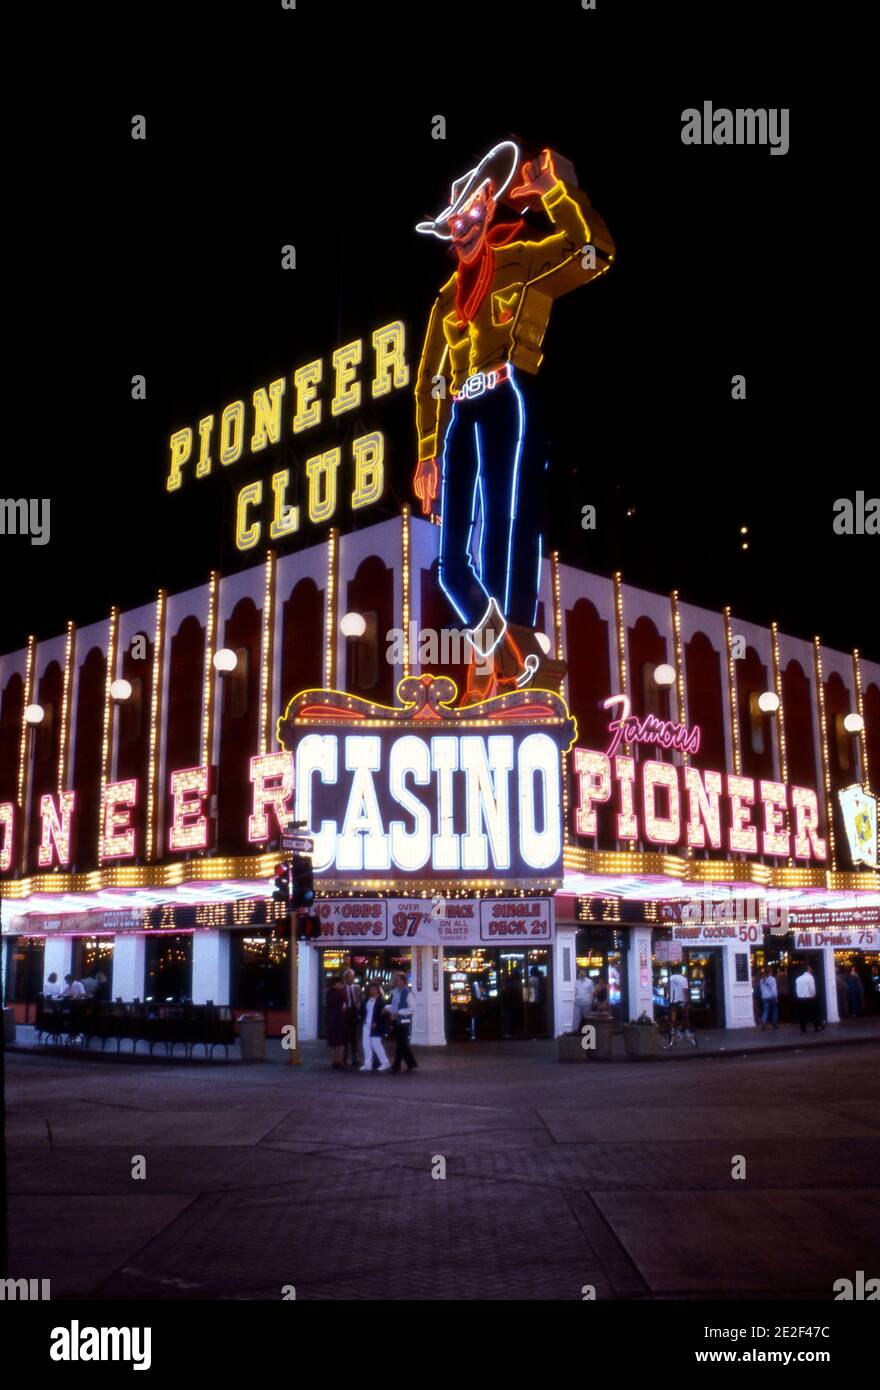 Vintage neon cowboy sign at the Pioneer Club Casino on Fremont Street in Las Vegas, Nevada Stock Photo